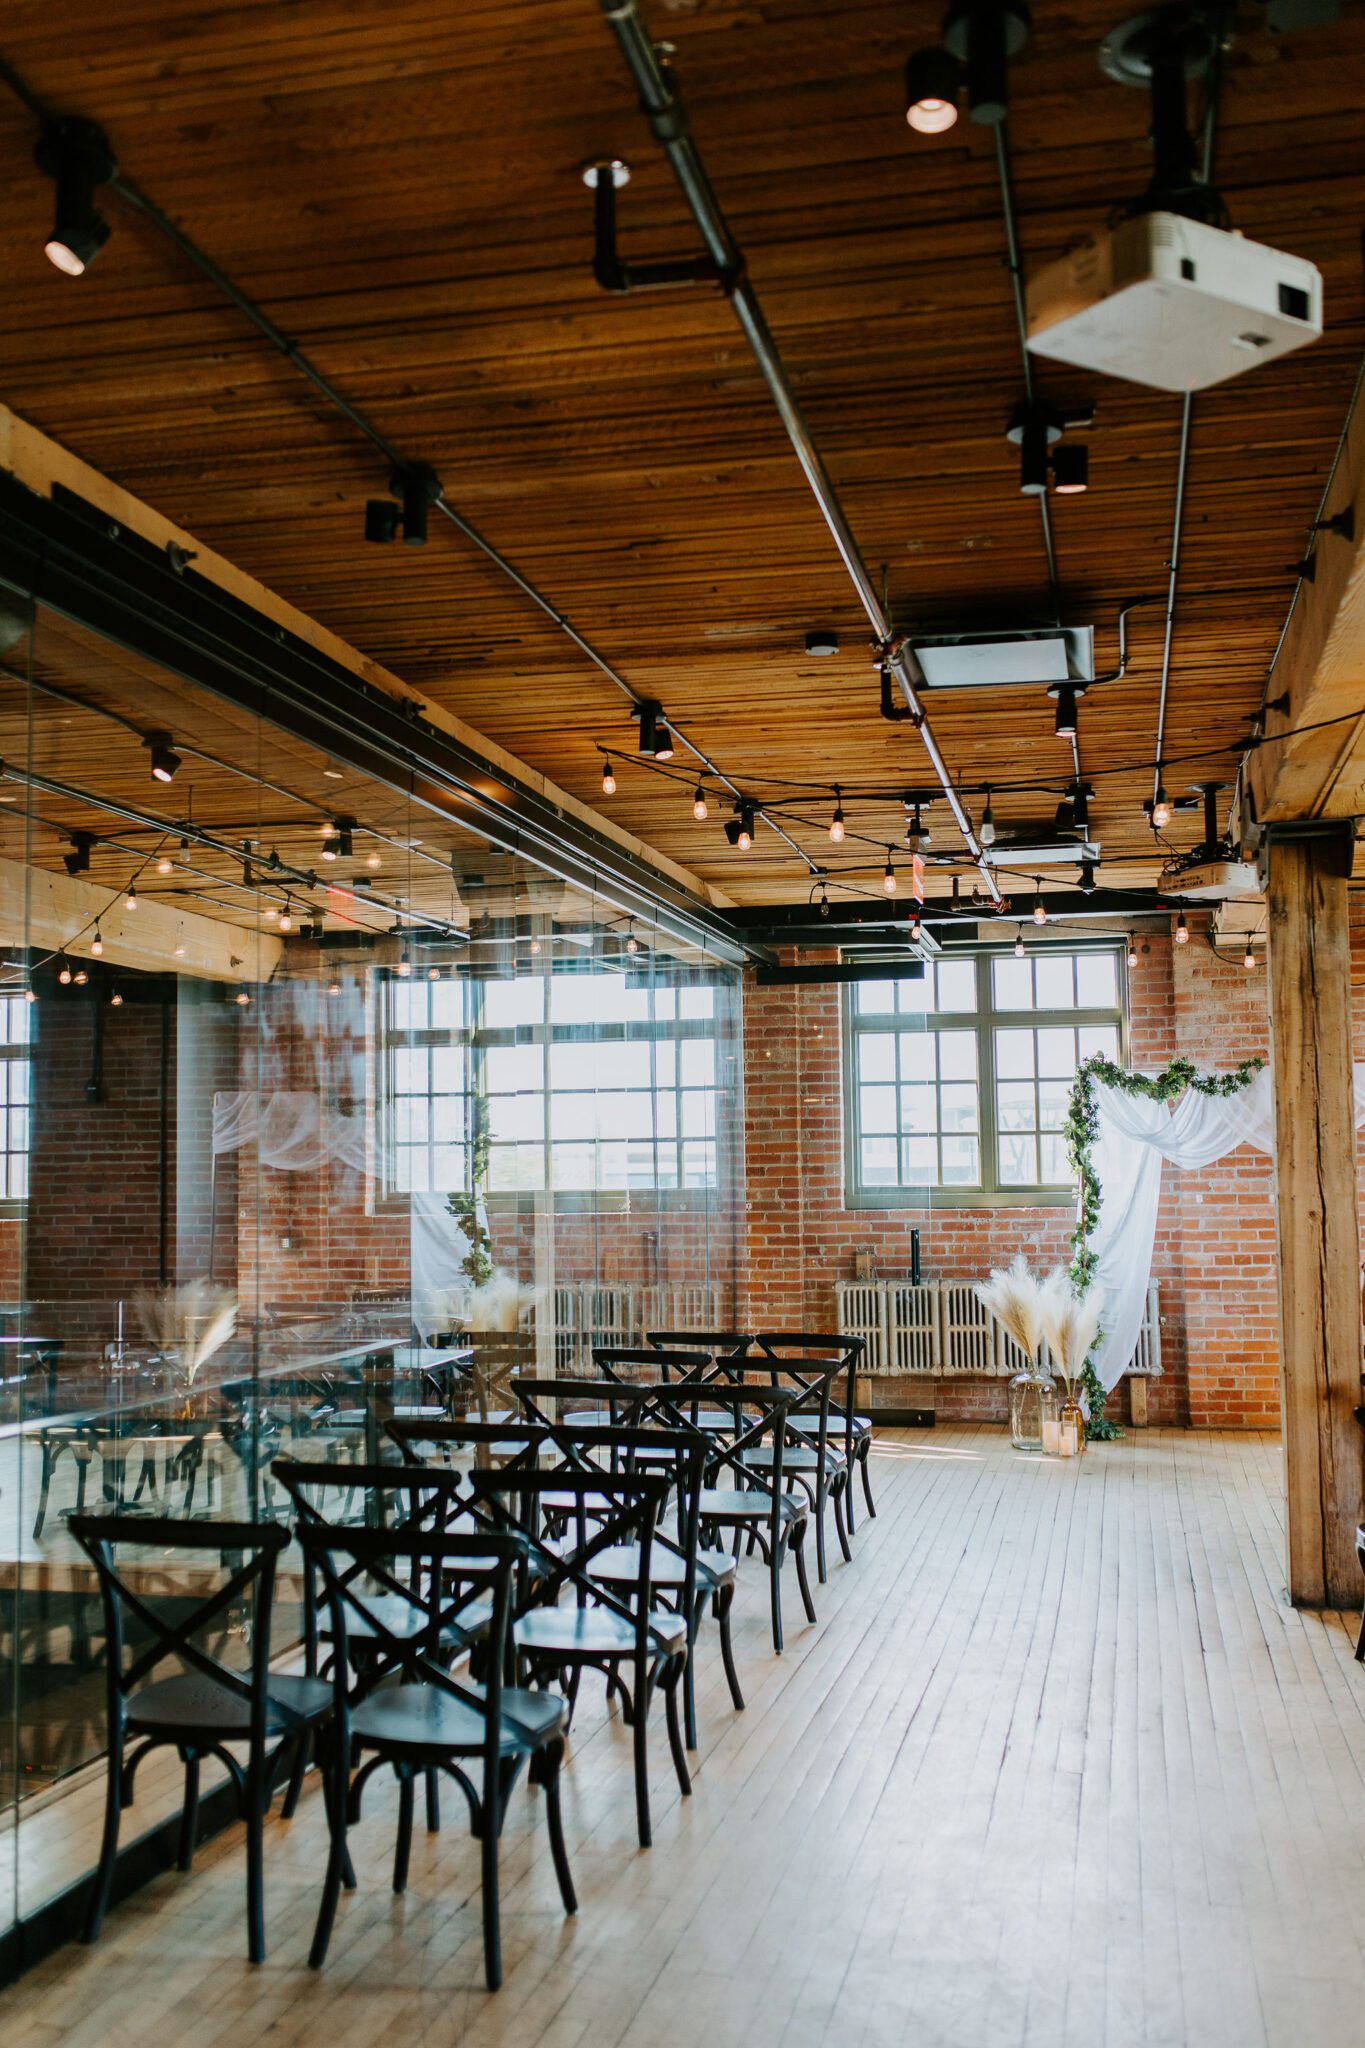 Wedding ceremony at Charbar in Calgary, AB. Rustic and modern wedding venues